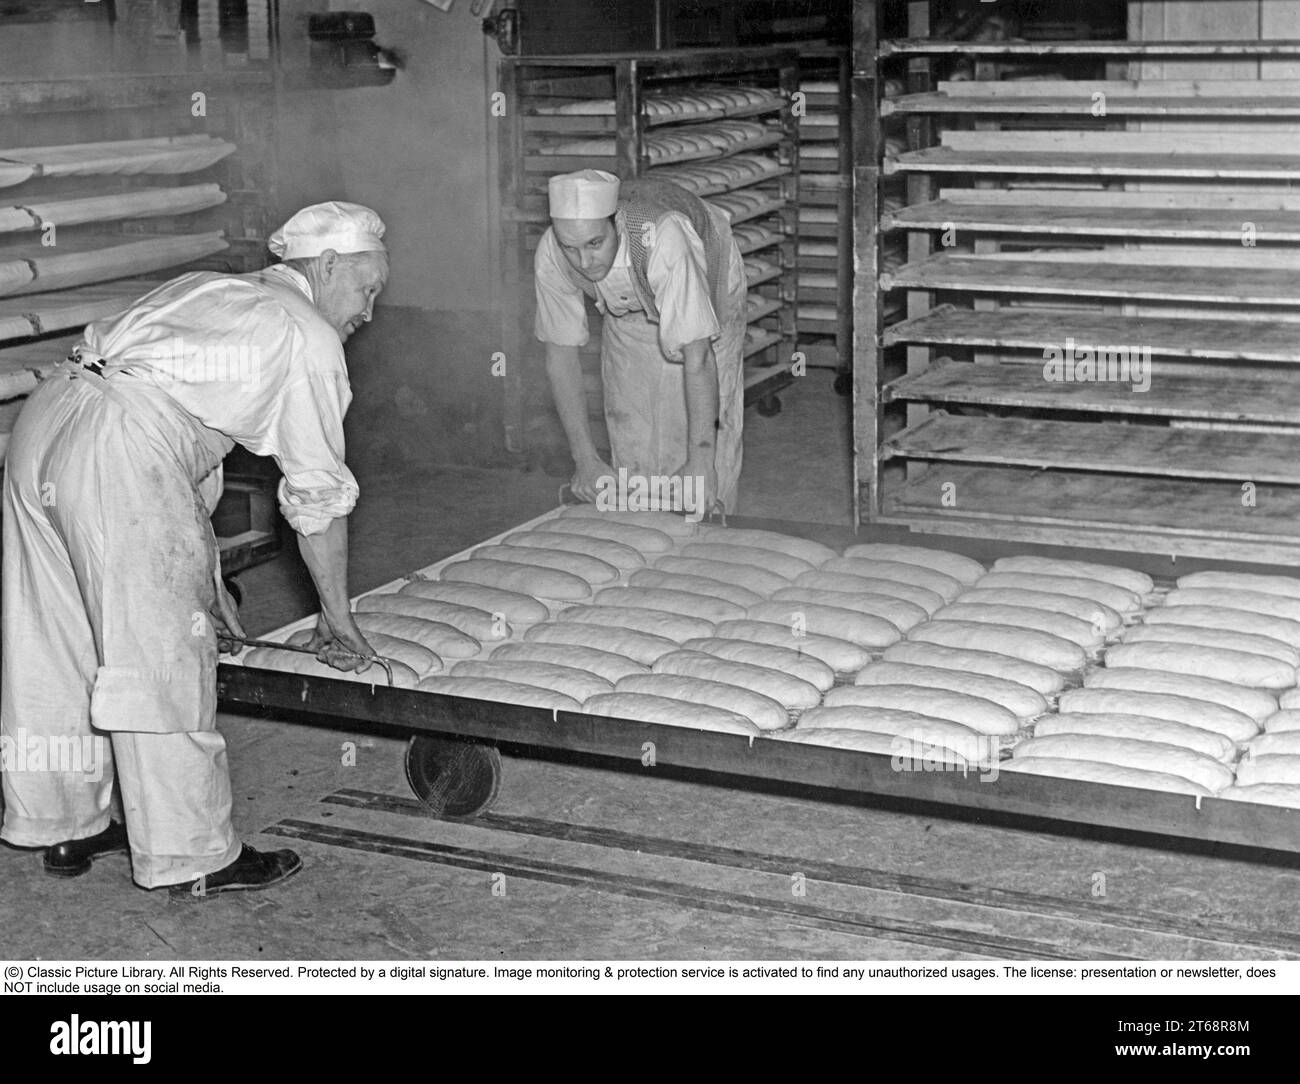 Bakery in the 1930s. Two men working in the bakery, handling the loafs of bread ready to be put into the oven. This is a industrial bakery, baking thousands of bread. Sweden 1939 Stock Photo